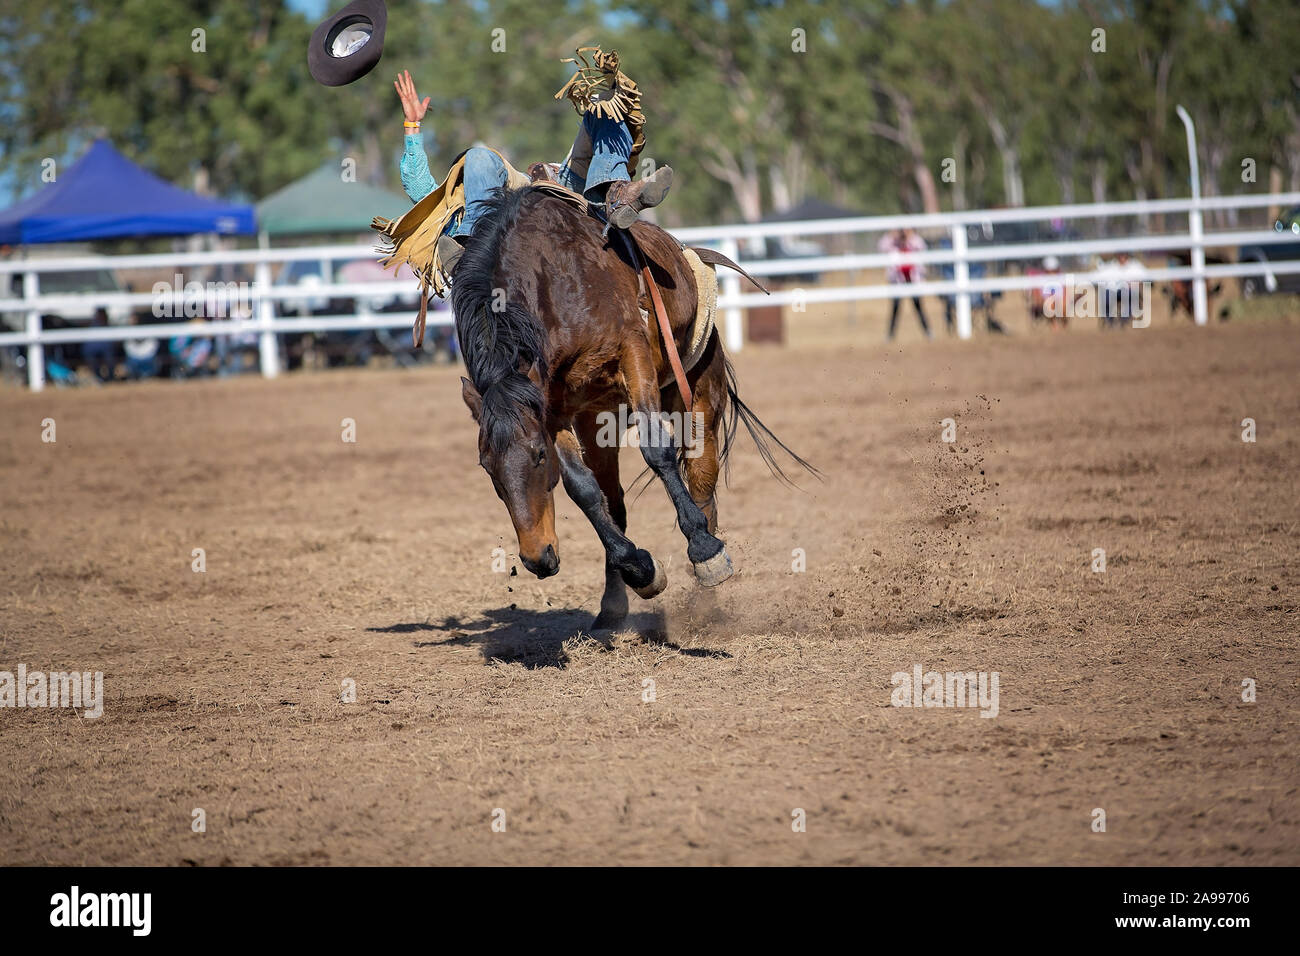 Cowboy is falling off his ride on bucking horse in bareback bronc event at a country rodeo and loses his hat. Stock Photo